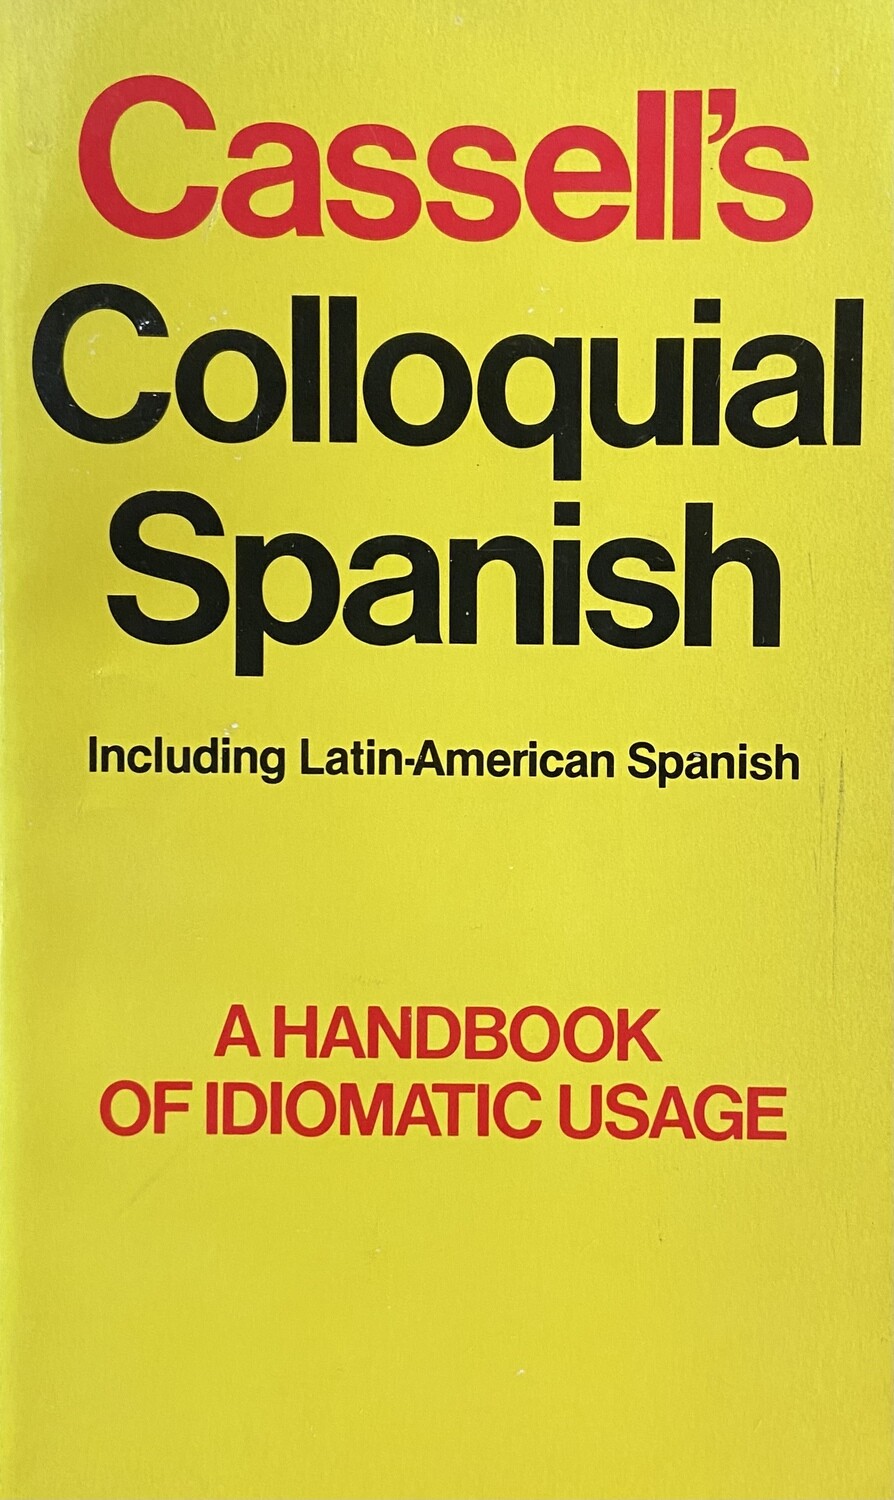 Cassell’s Colloquial Spanish